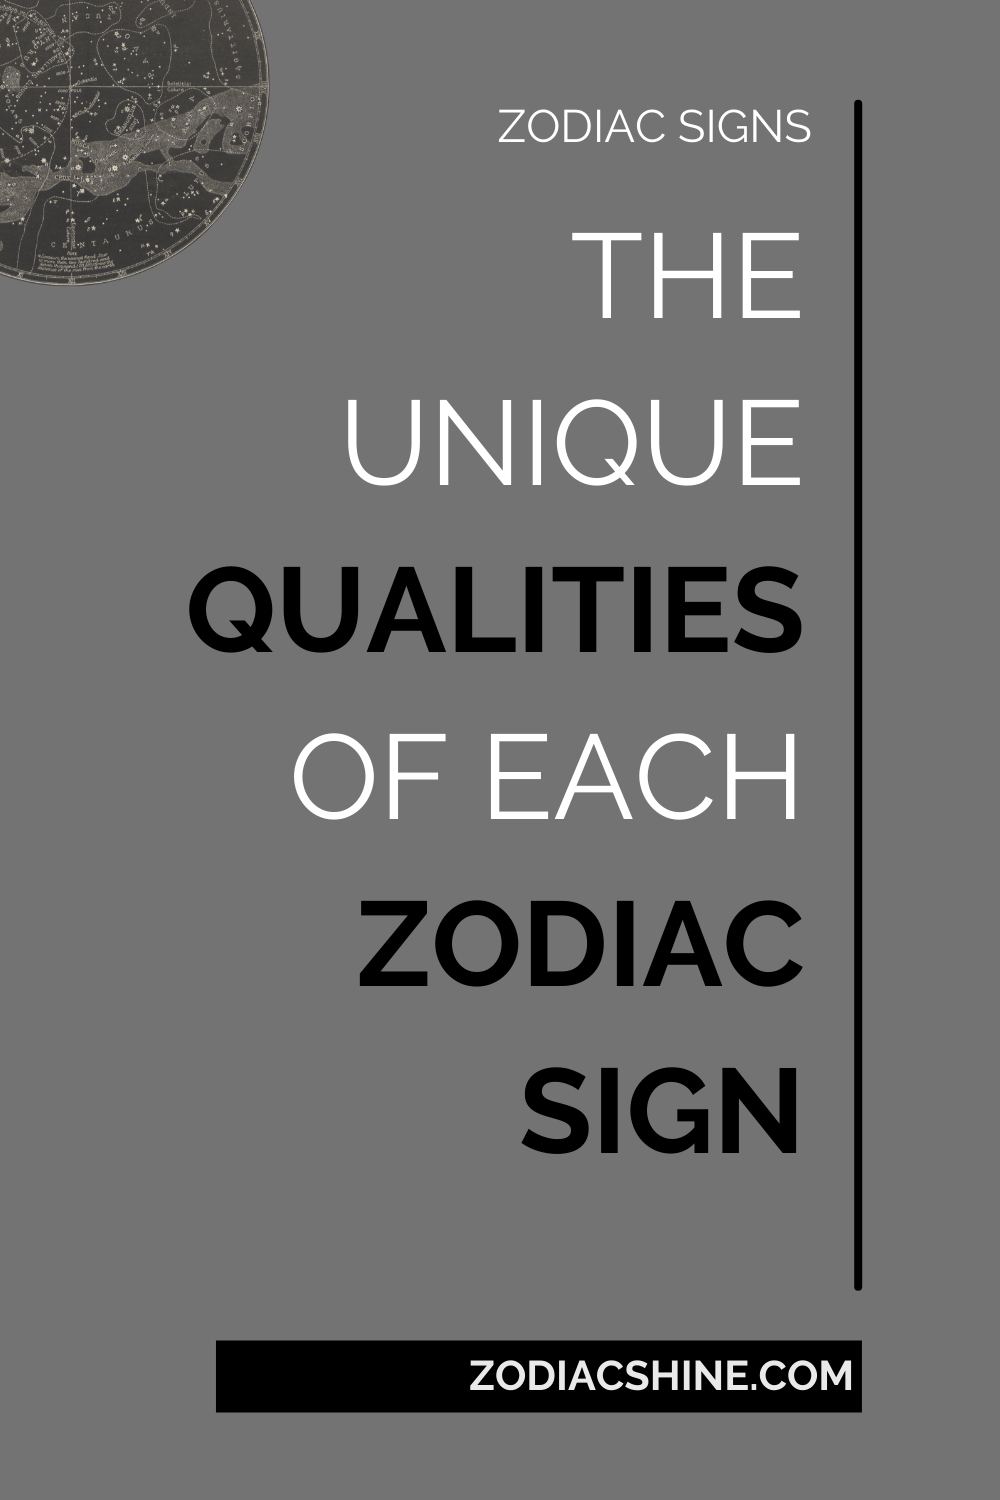 THE UNIQUE QUALITIES OF EACH ZODIAC SIGN